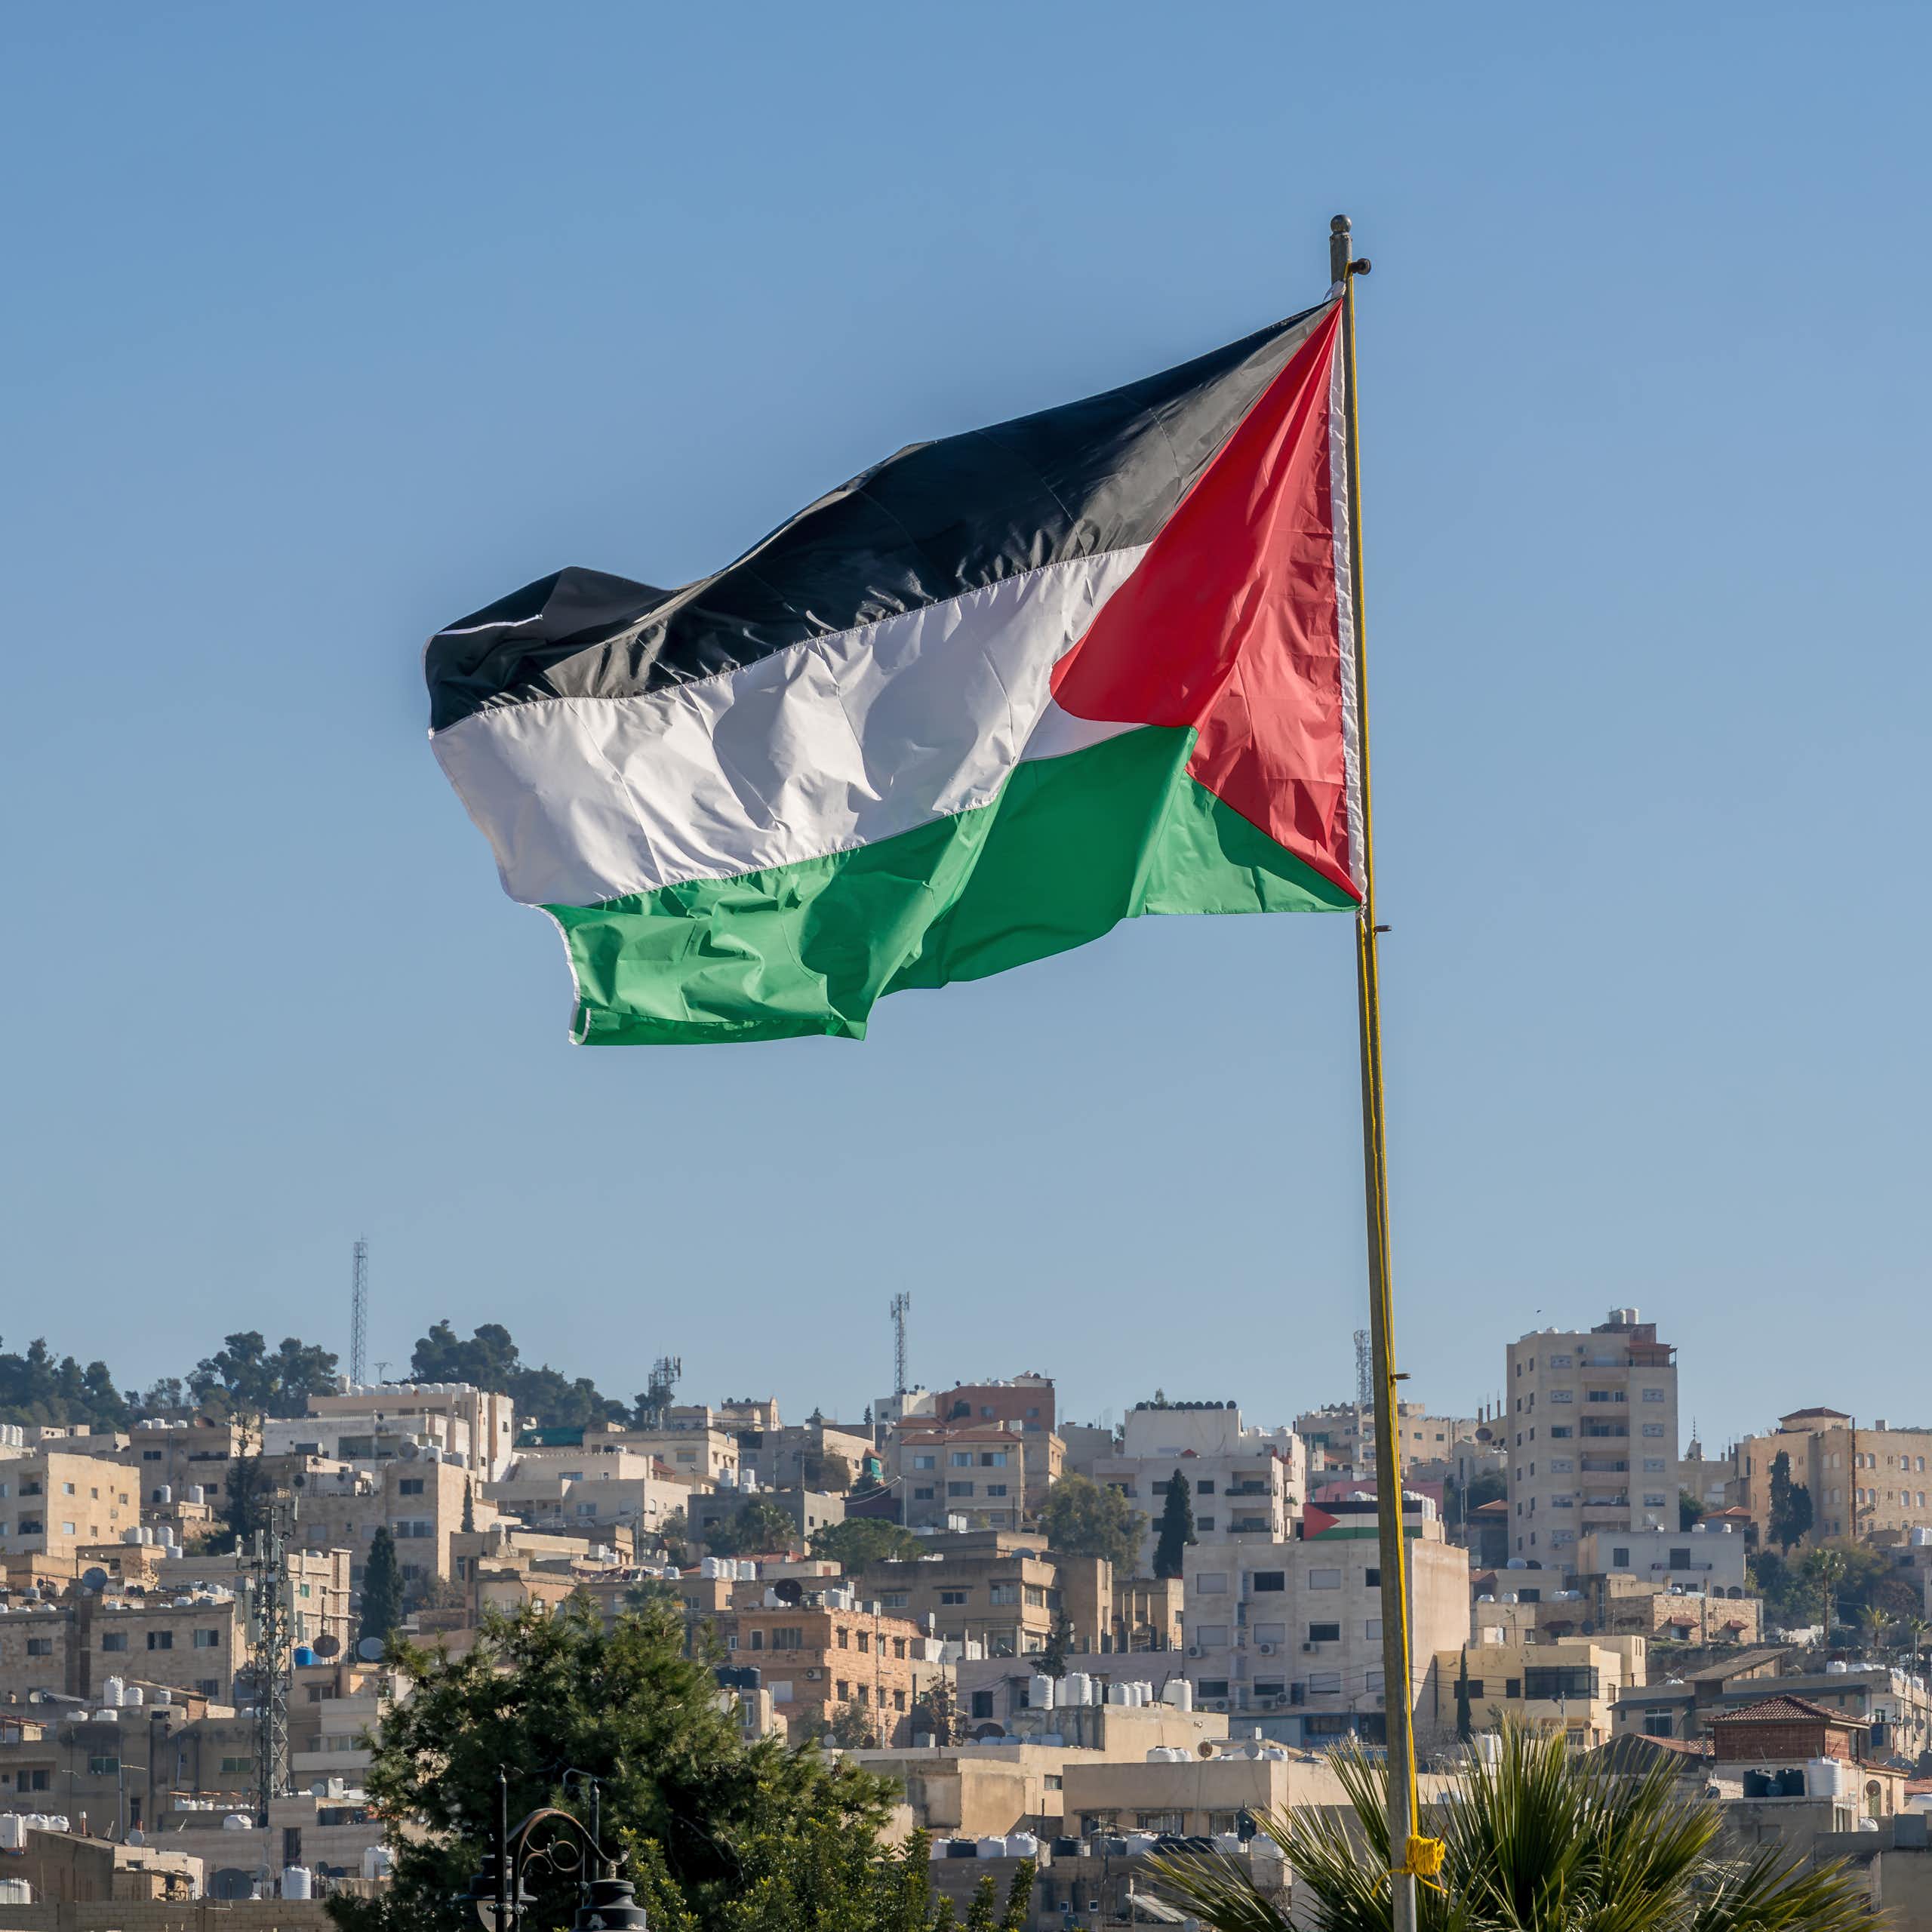 Norway, Spain and Ireland have recognised a Palestinian state – what’s stopping NZ?